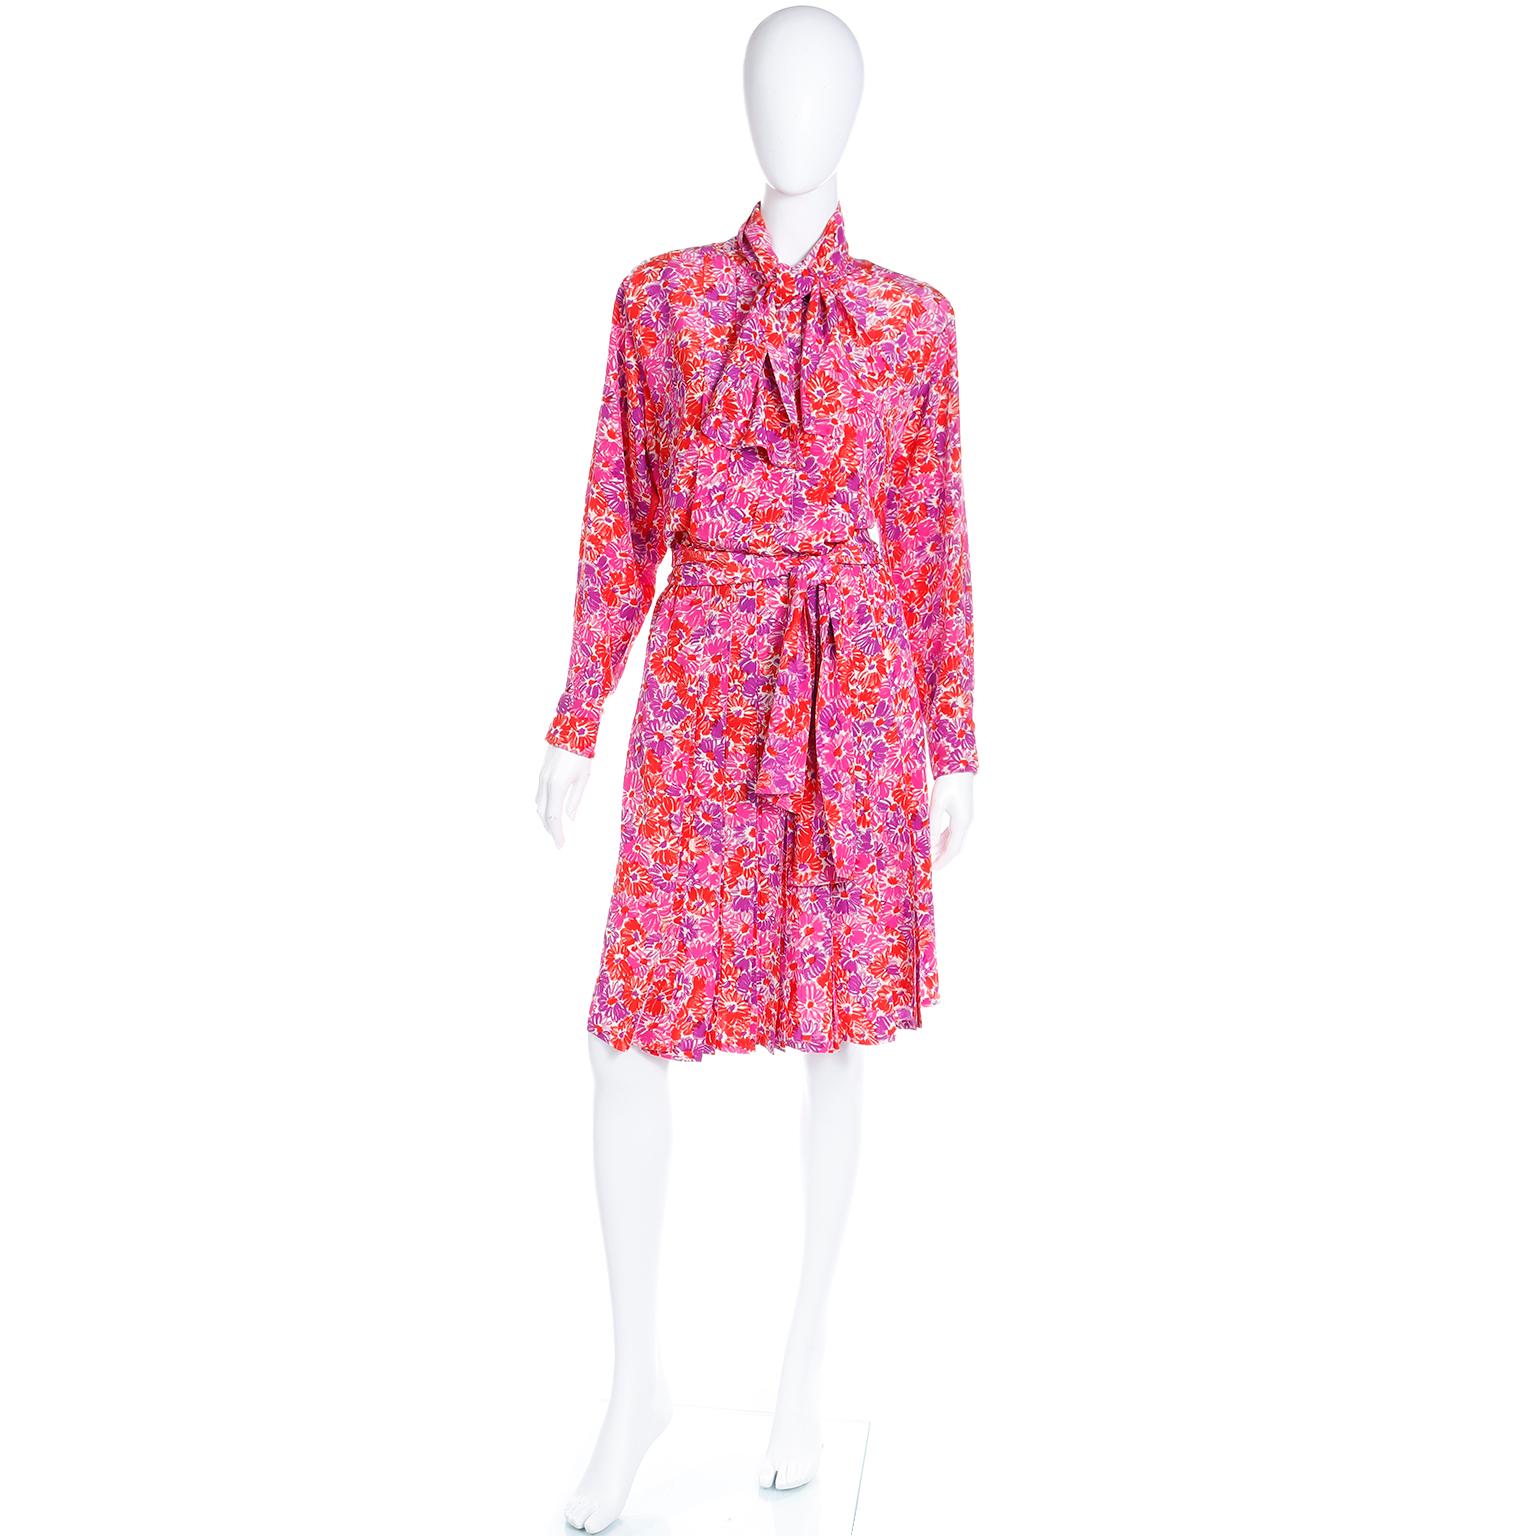 Yves Saint Laurent S/S 1989 Vintage Colorful Pink Floral Silk YSL Runway Dress In Excellent Condition For Sale In Portland, OR